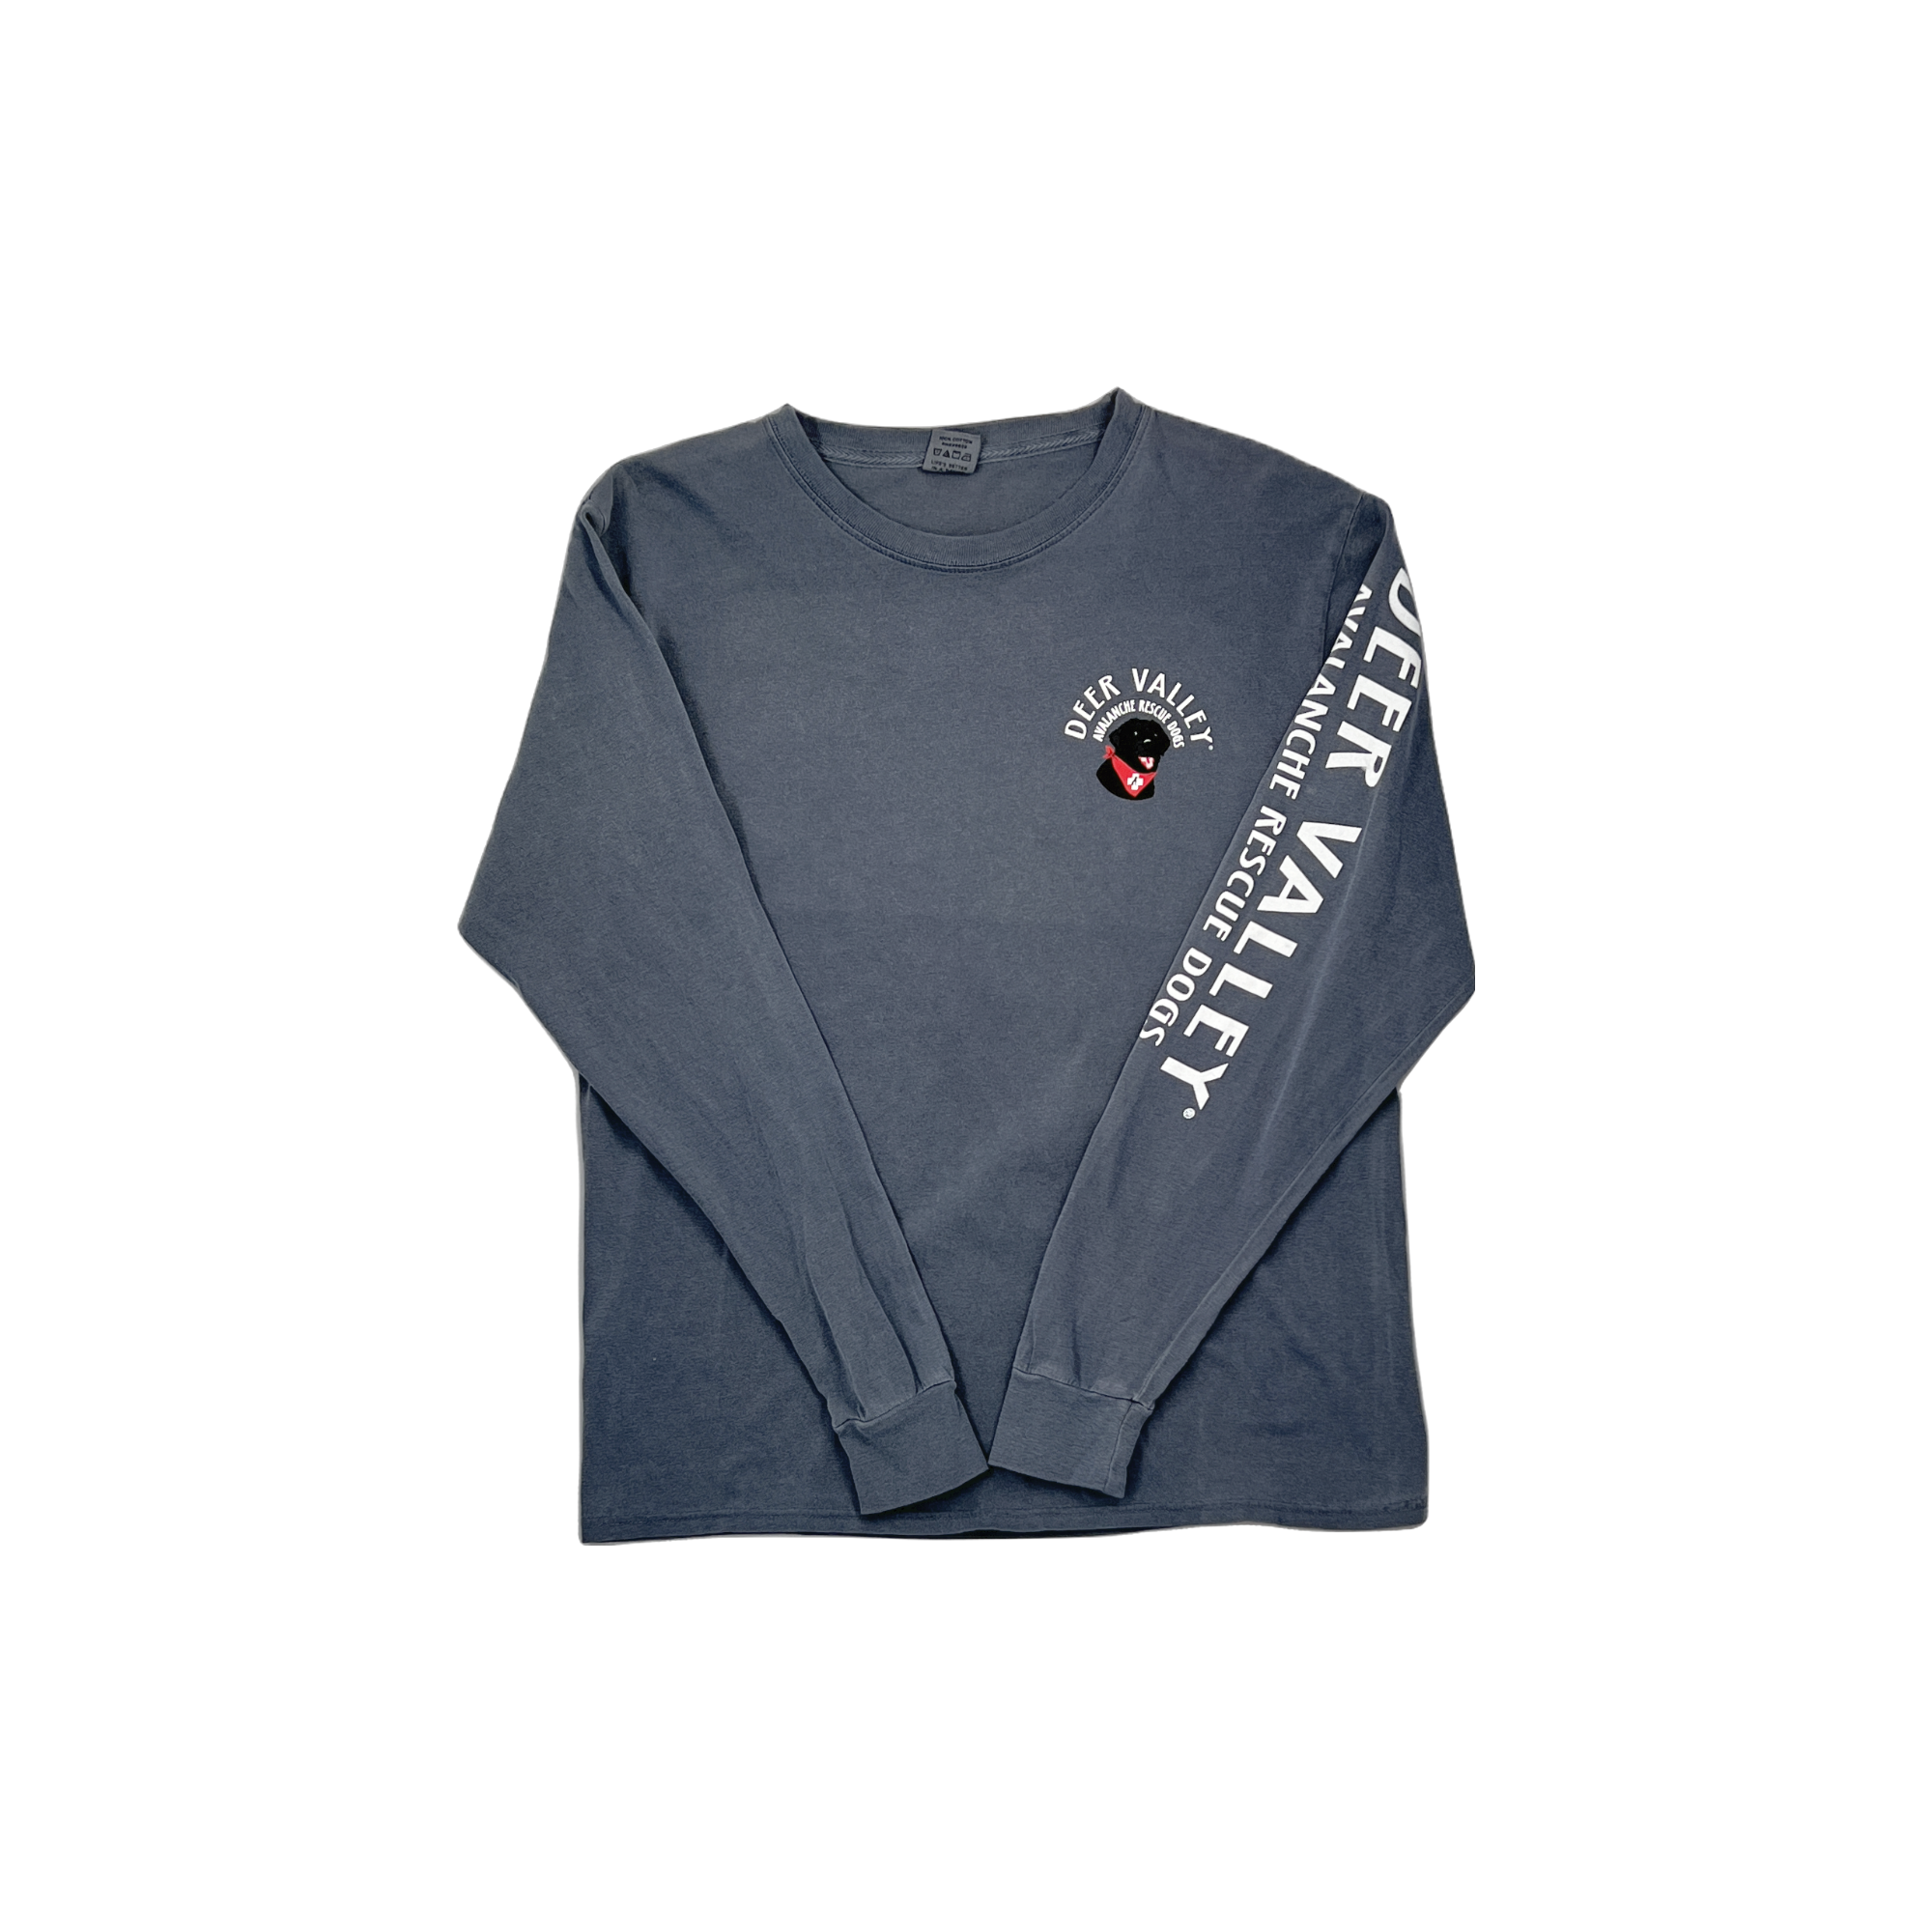 avalanche rescue dog long sleeve tee shirt front